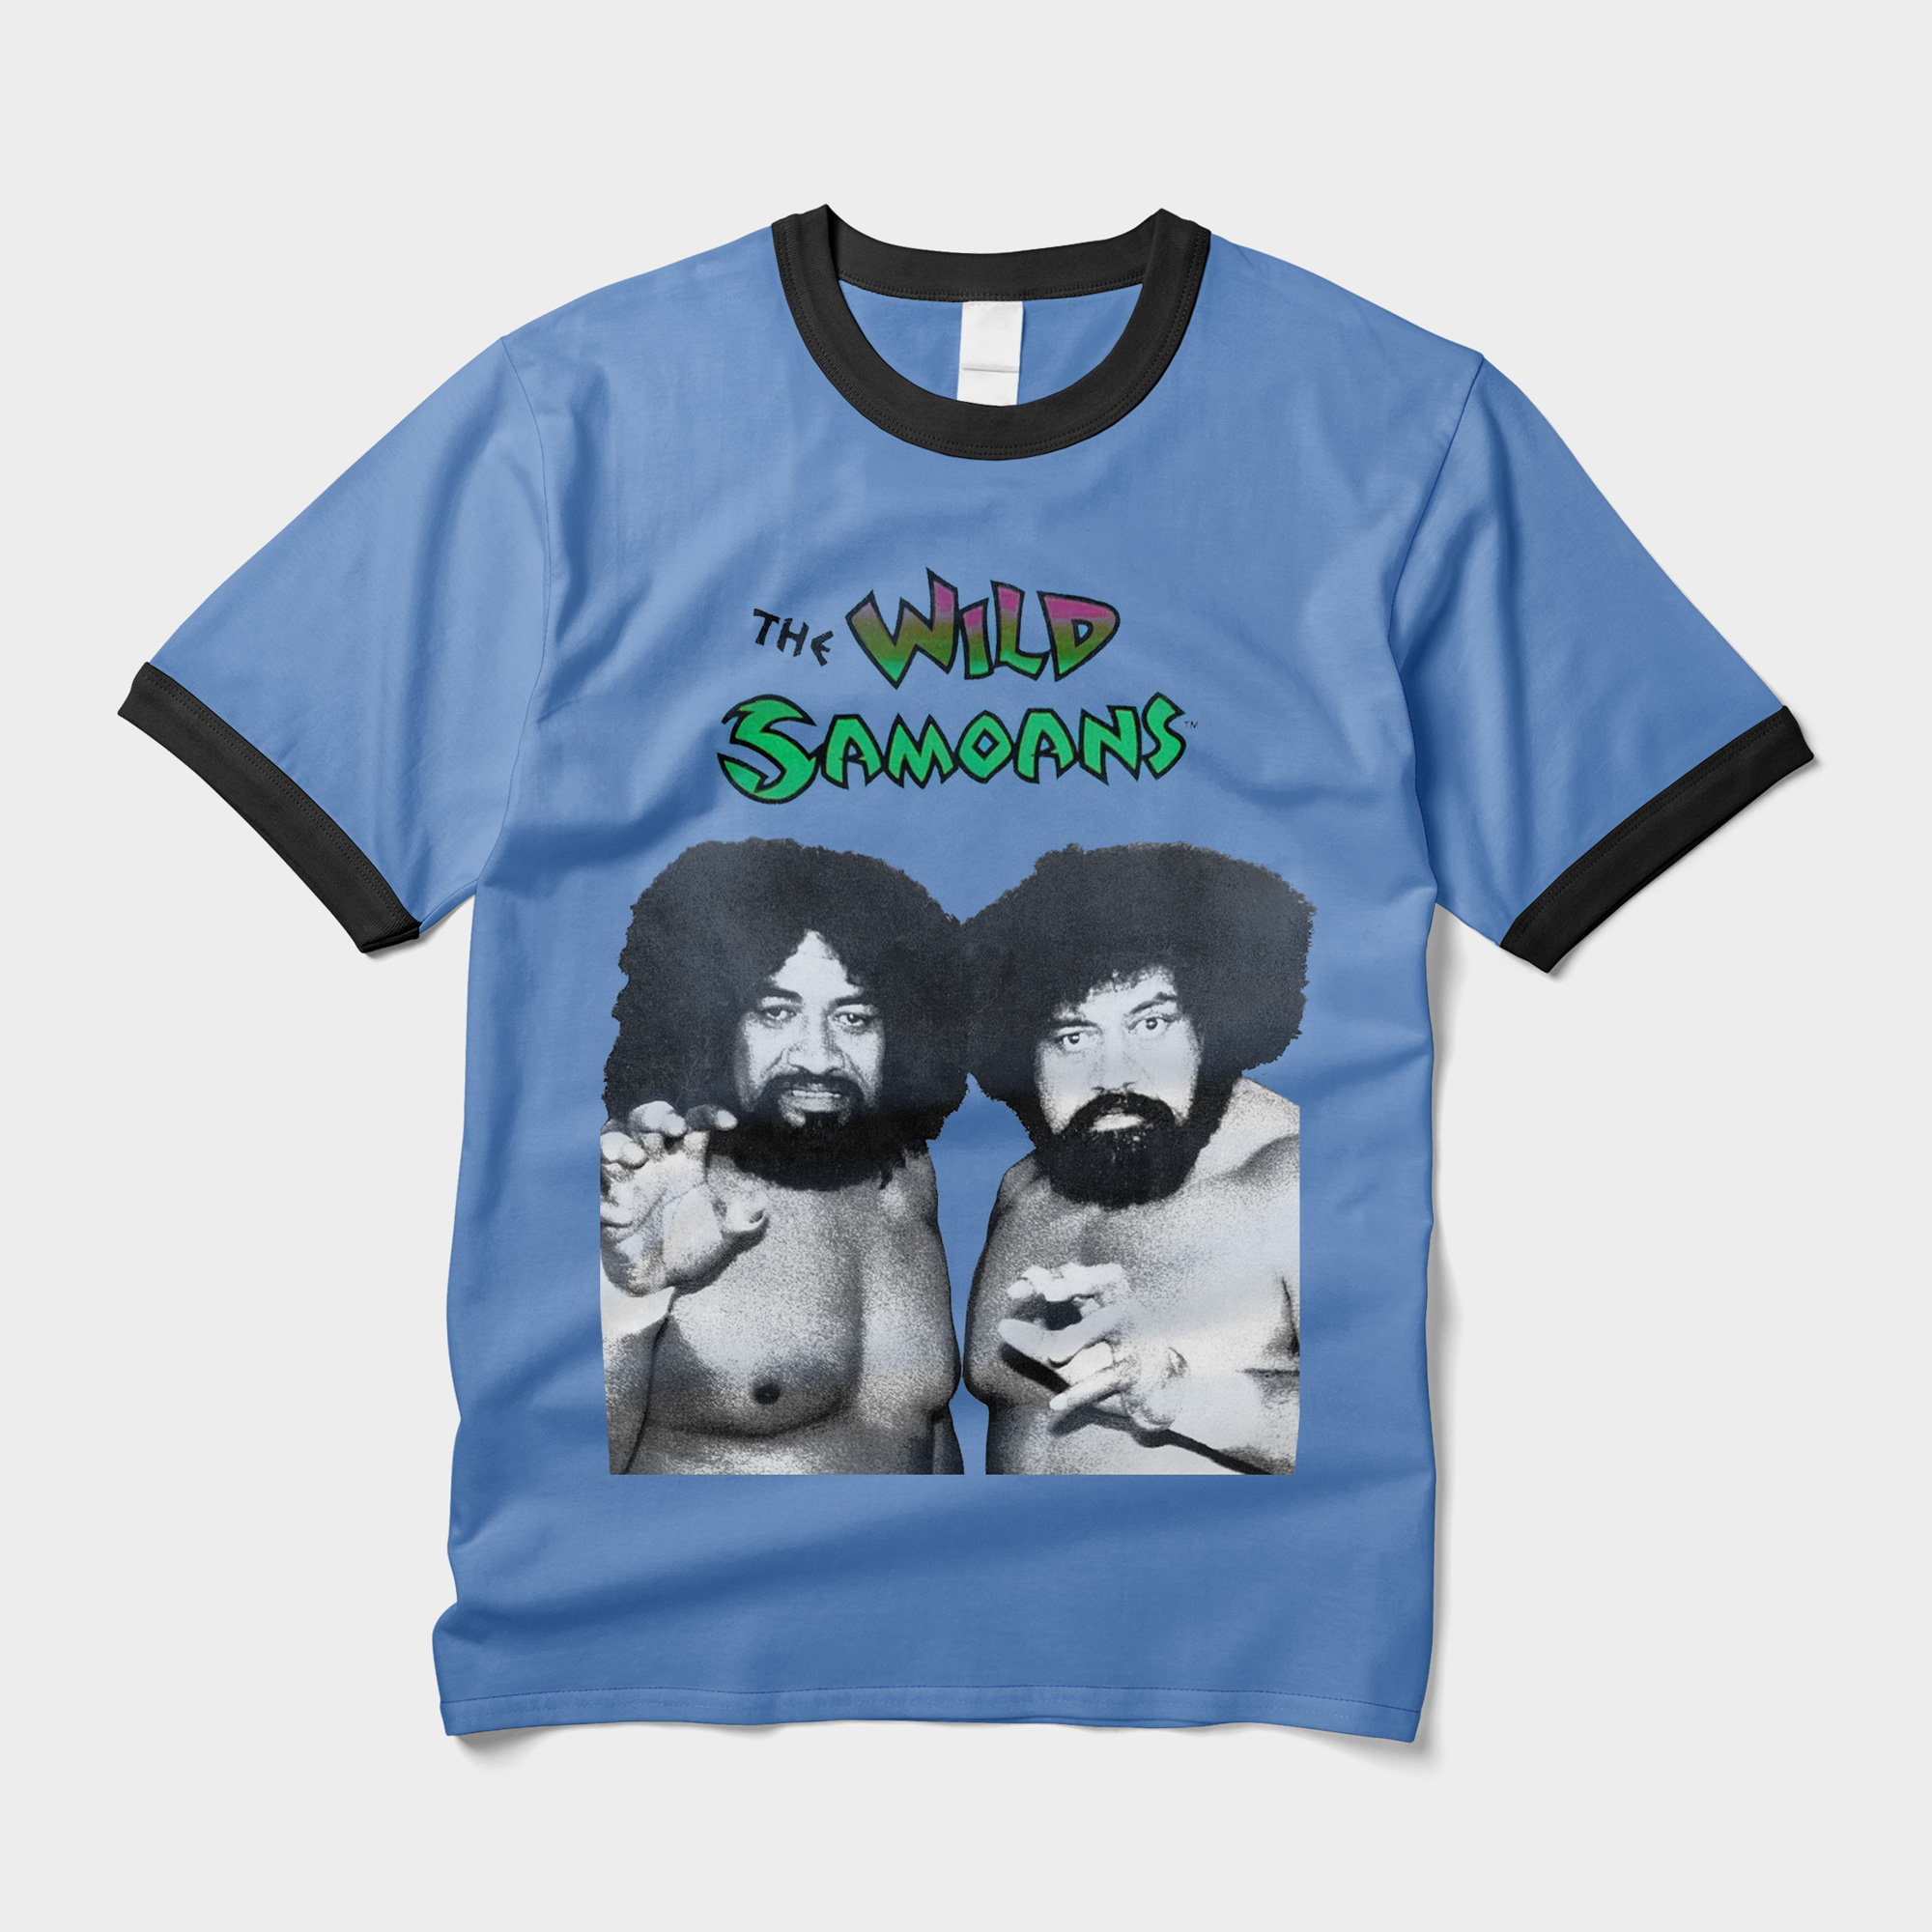 The Wild Samoan's t-shirt has a vintage feel with a heather blue fabric and a black-and-white photo of themselves. 